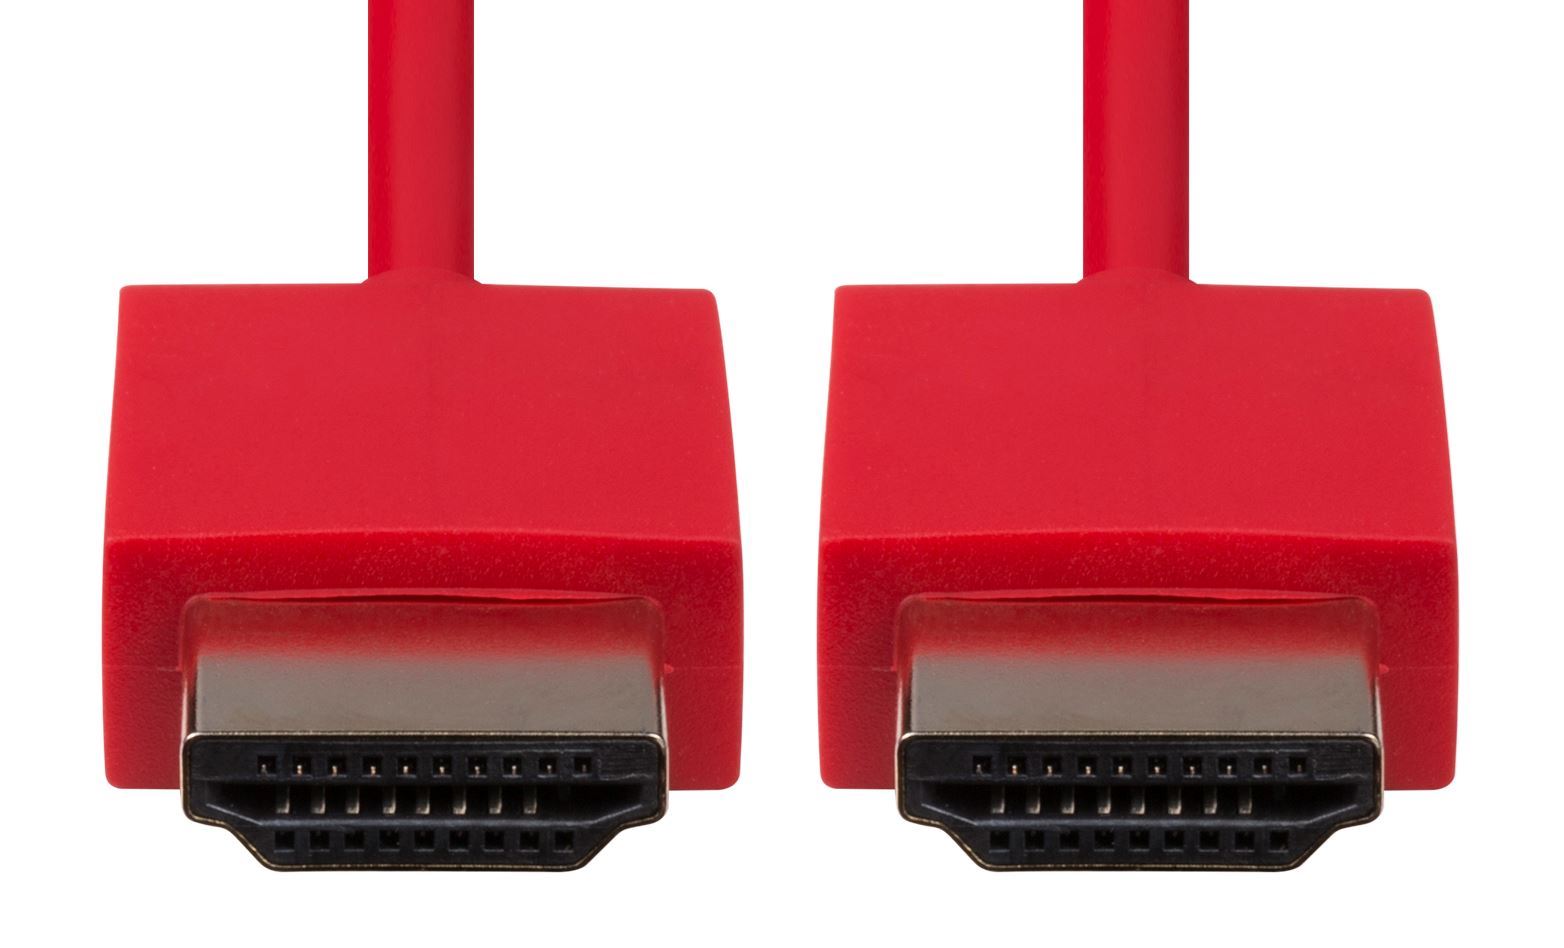 DYNAMIX_2M_HDMI_RED_Nano_High_Speed_With_Ethernet_Cable._Designed_for_UHD_Display_up_to_4K2K@60Hz._Slimline_Robust_Cable._Supports_CEC_2.0,_3D,_&_ARC._Supports_Up_to_32_Audio_Channels. 776